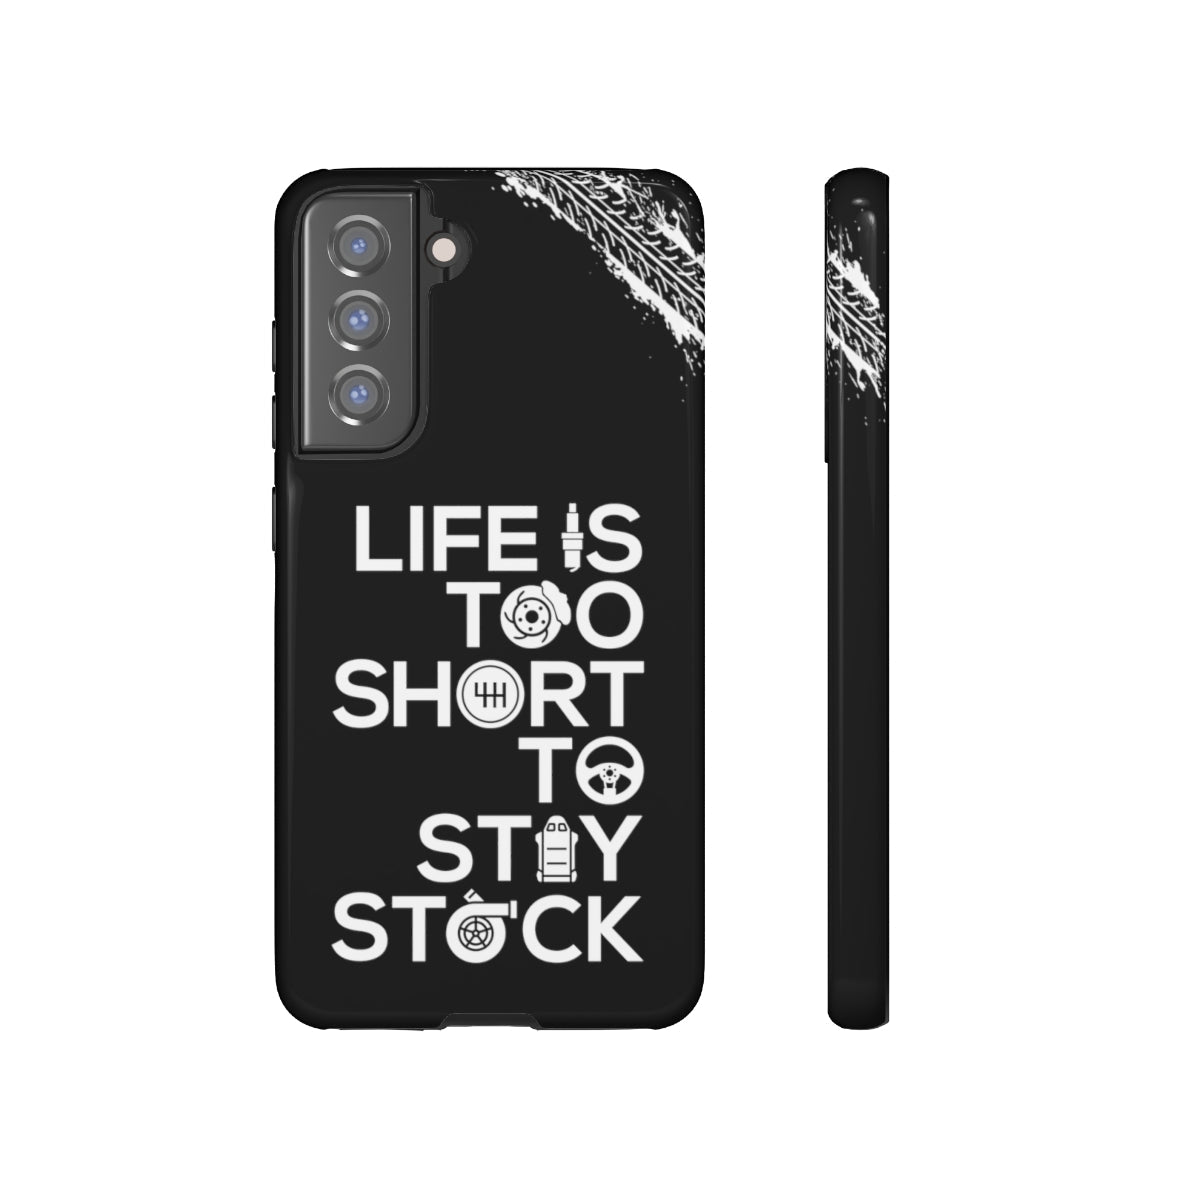 Life Too Short To Stay Stock - Car Phone Case - Samsung Galaxy S21 FE